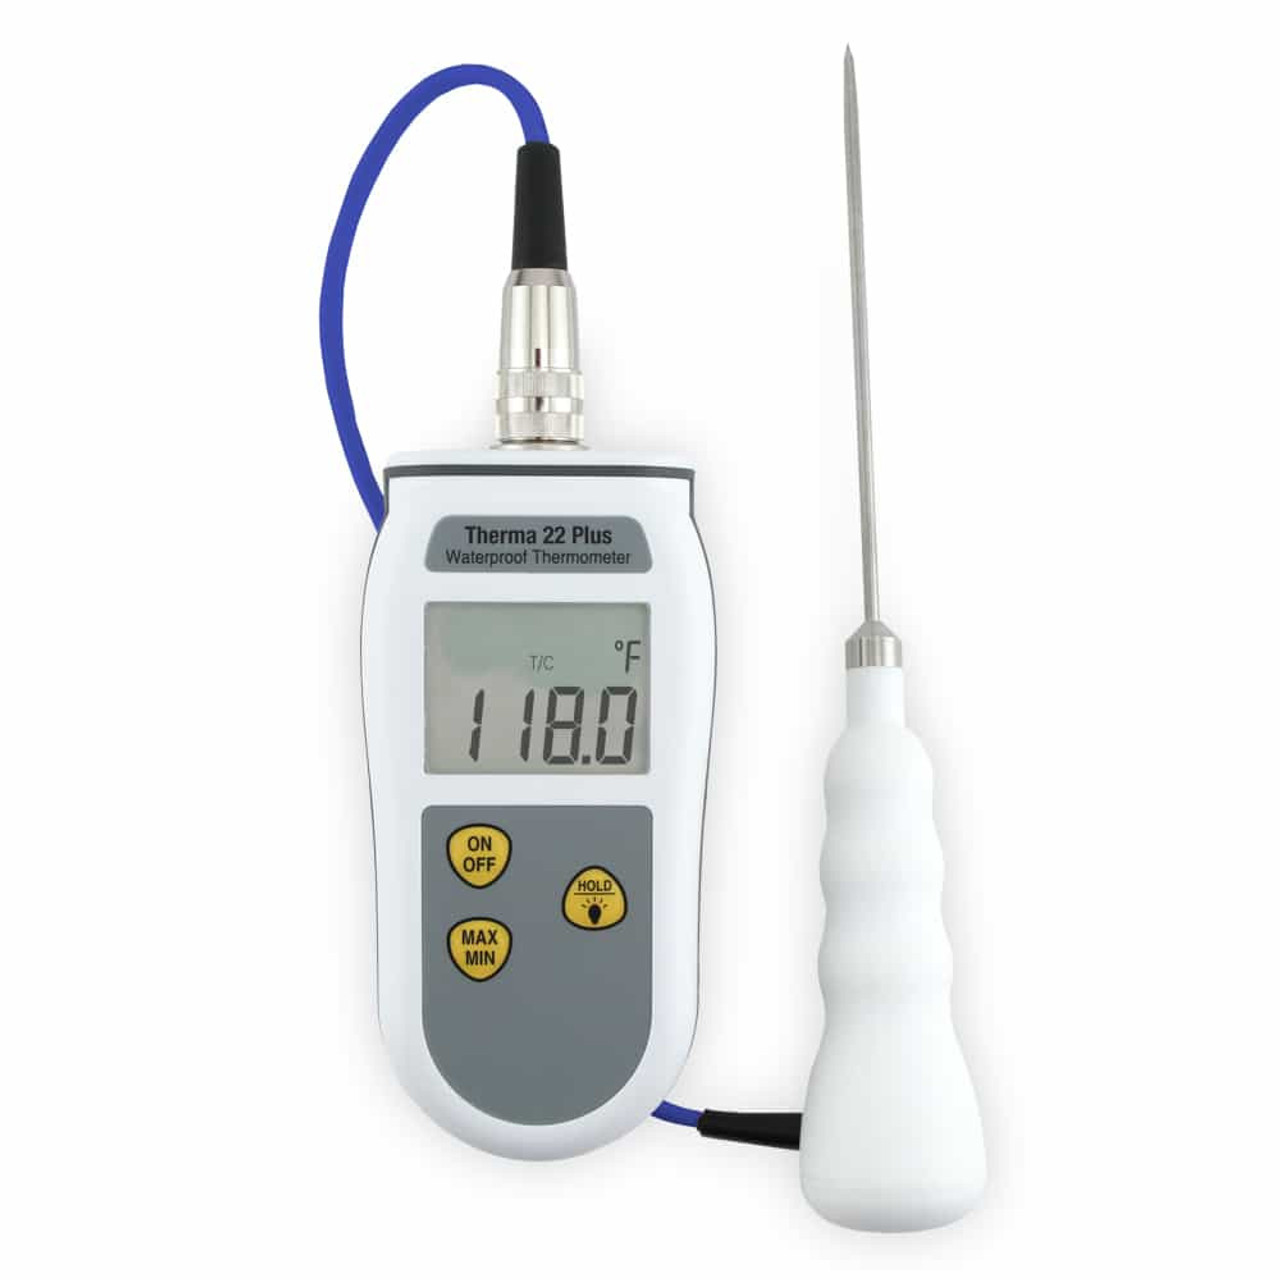 Thermoworks Therma K Professional Thermometer. Made in USA